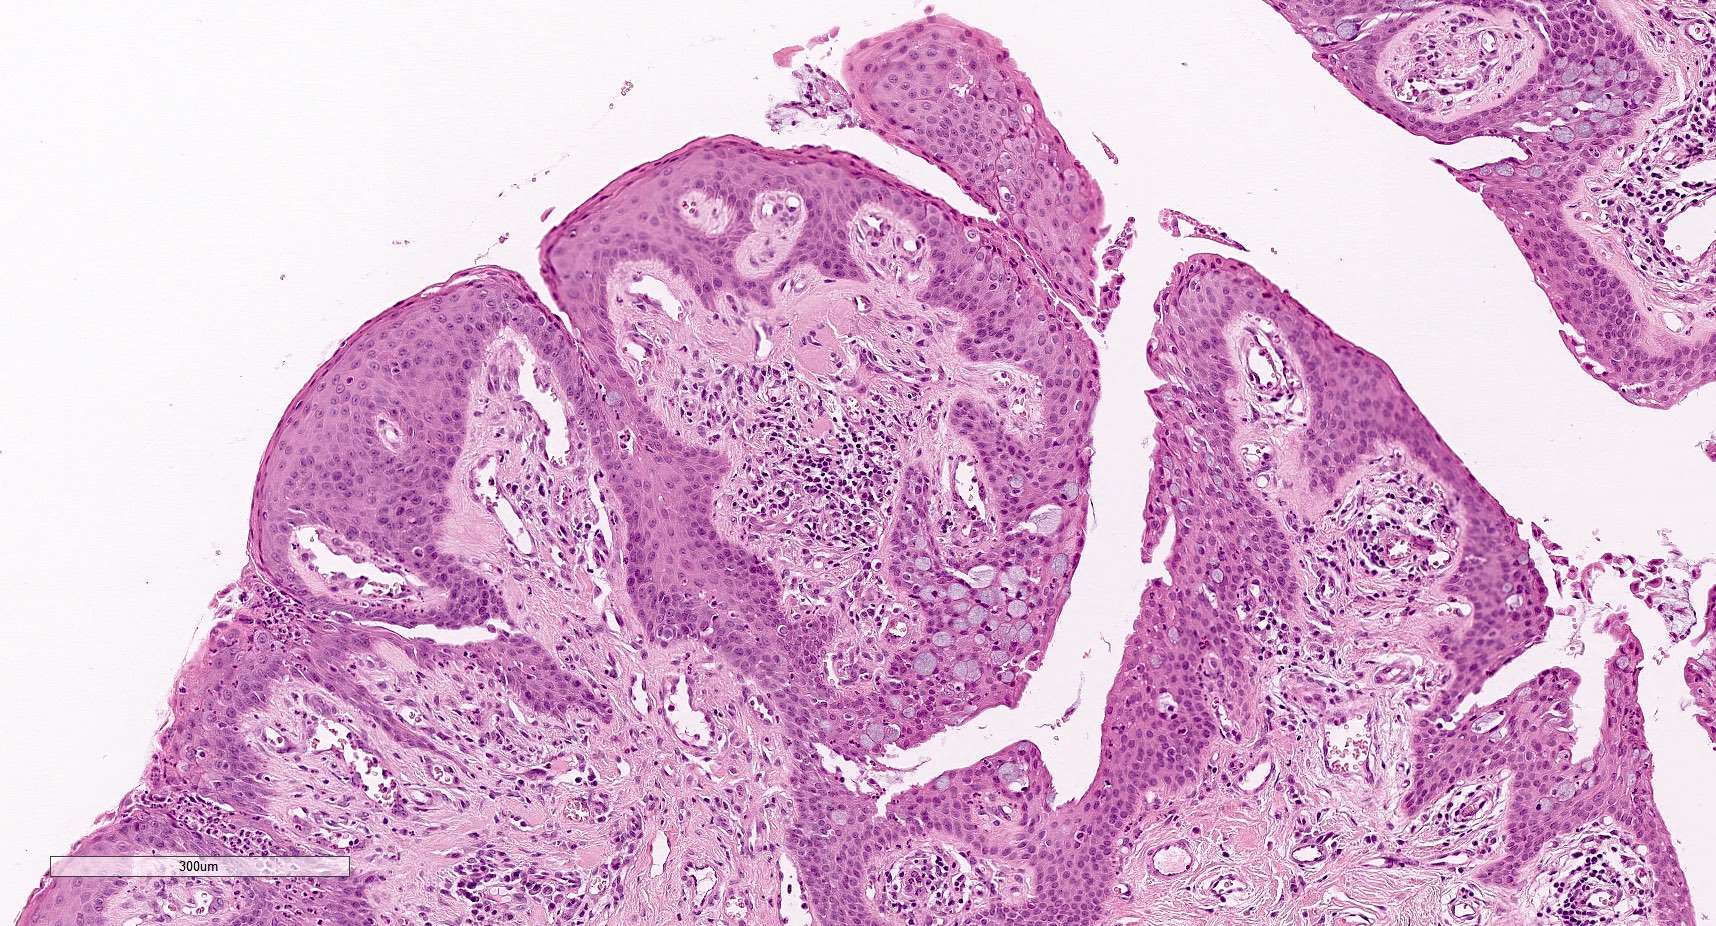 Acanthotic epithelium with fibrovascular cores